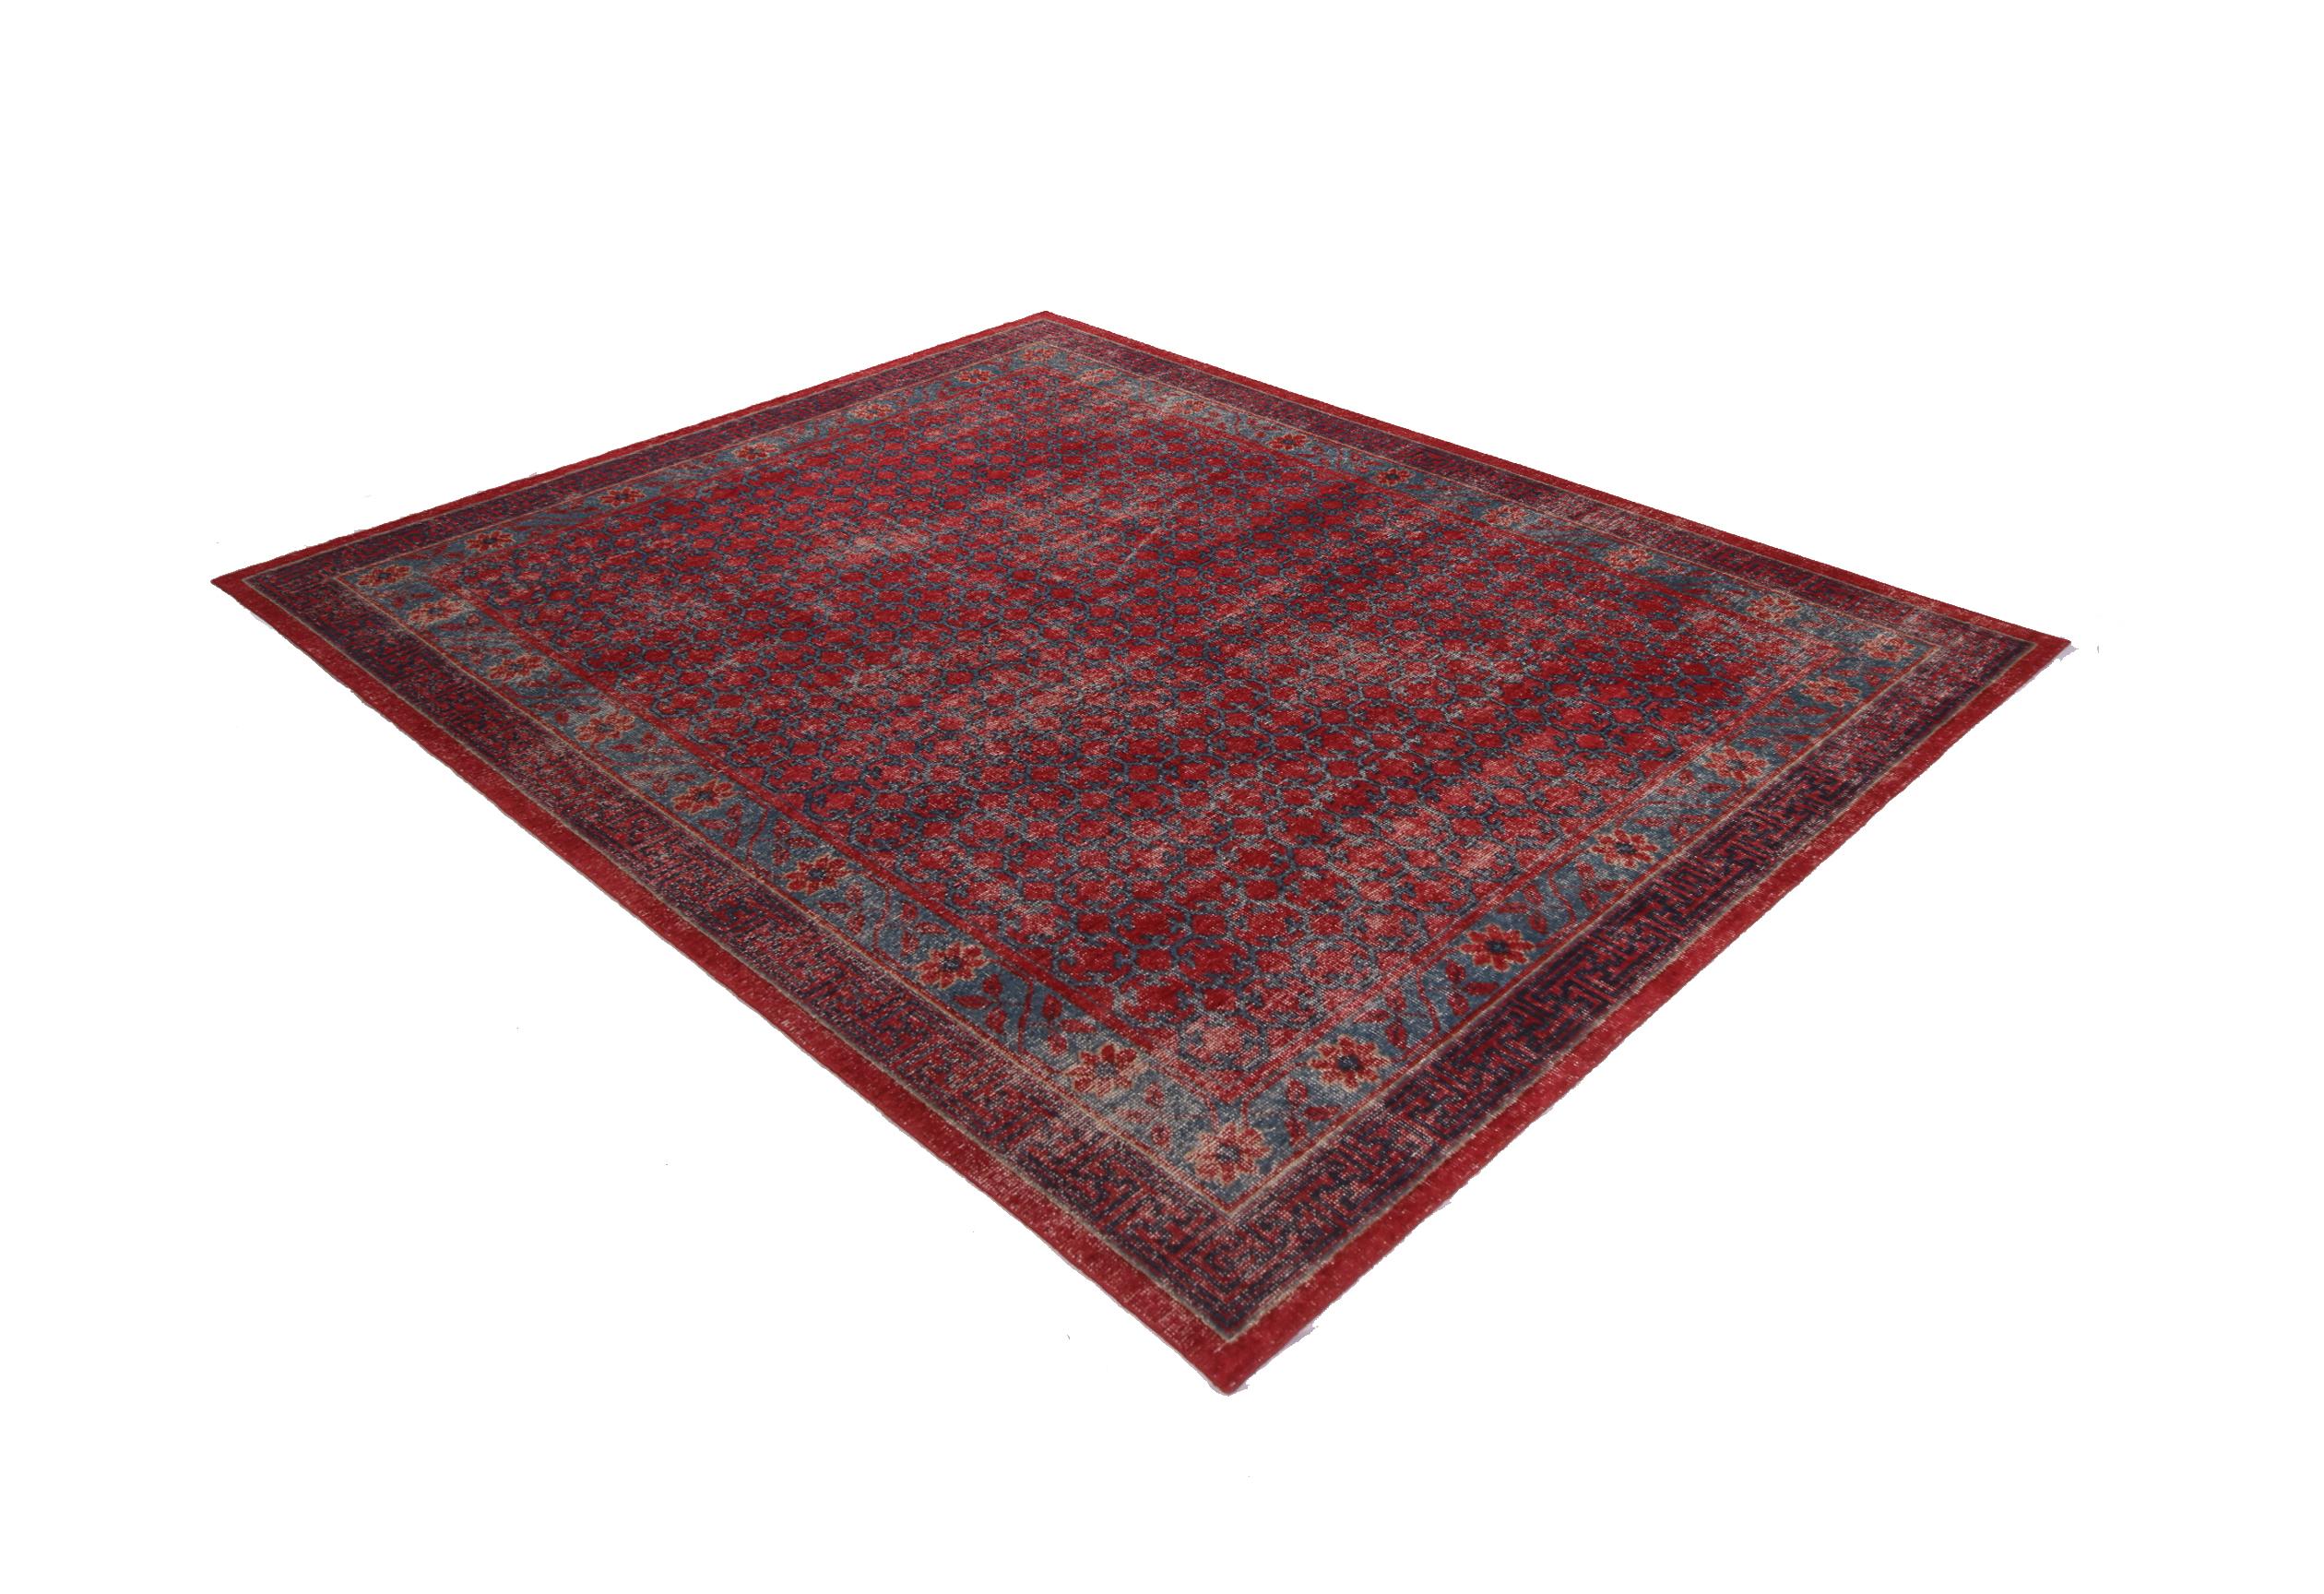 This contemporary hand knotted wool Khotan rug hails from Rug & Kilim’s Homage collection, enjoying a finer take on distressed shabby chic aesthetic with fewer knots per square inch. The bold velvet red and ink blue colorways complement a variety of